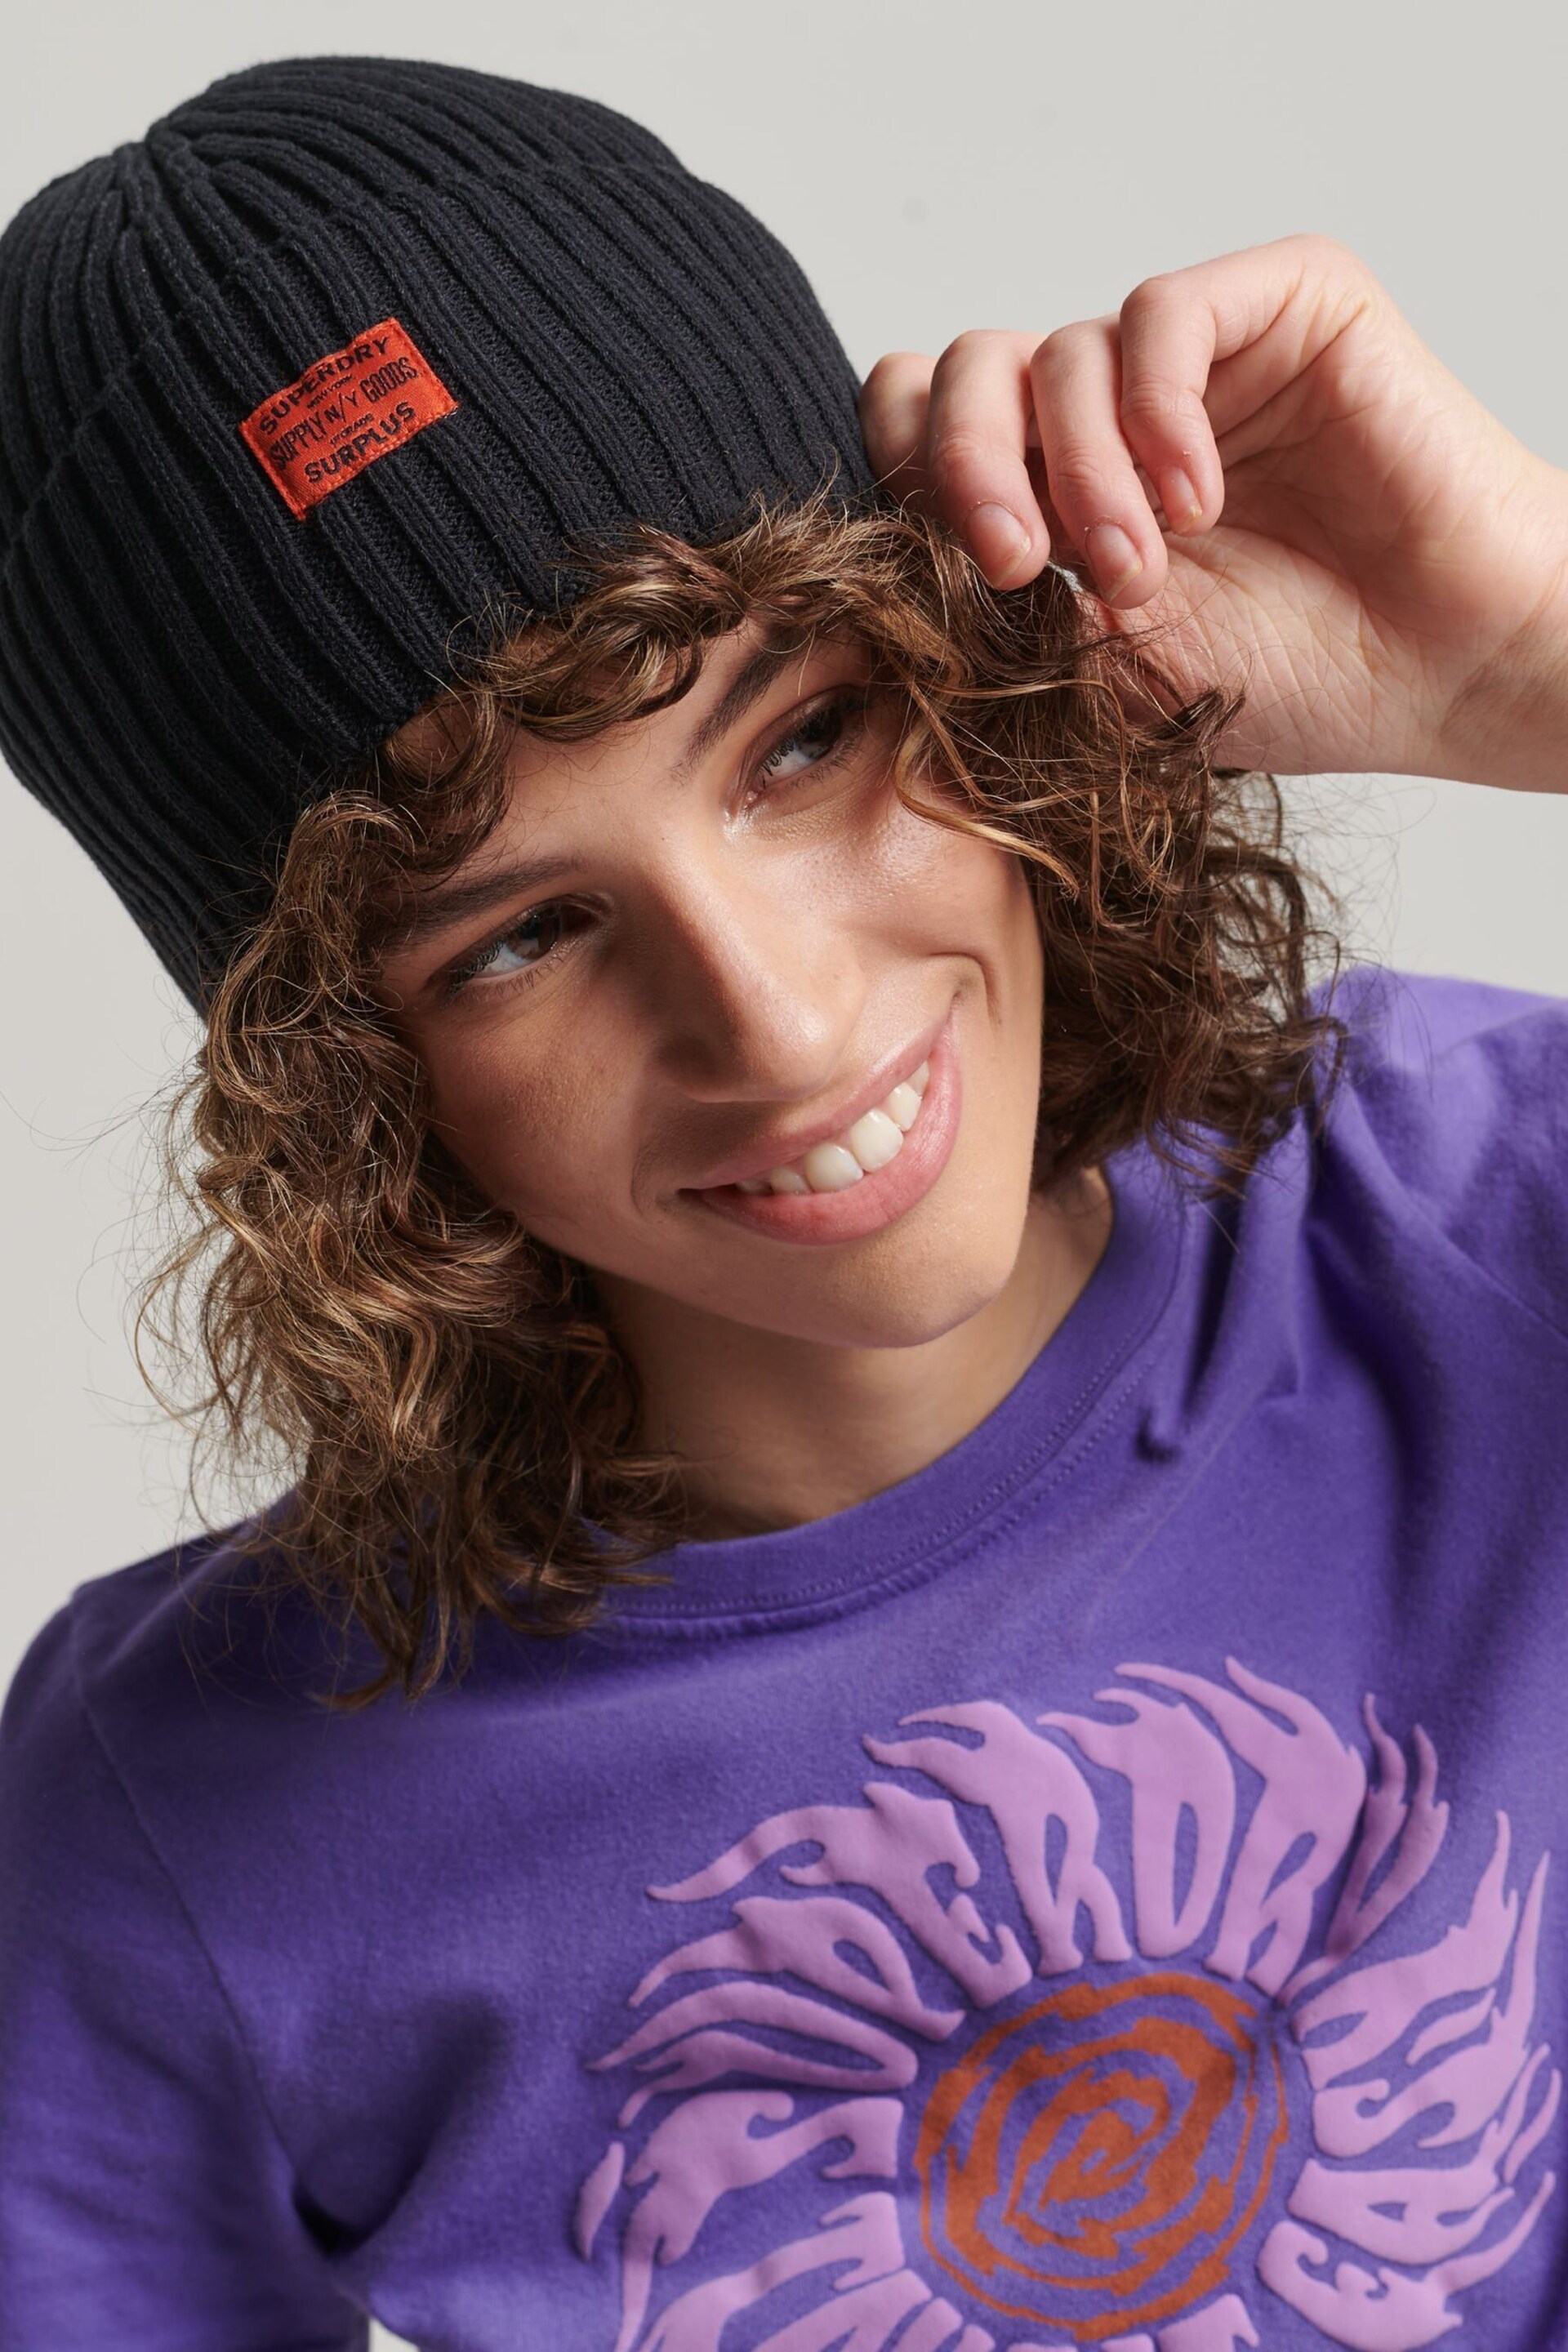 Superdry Black Workwear Knitted Beanie - Image 3 of 3